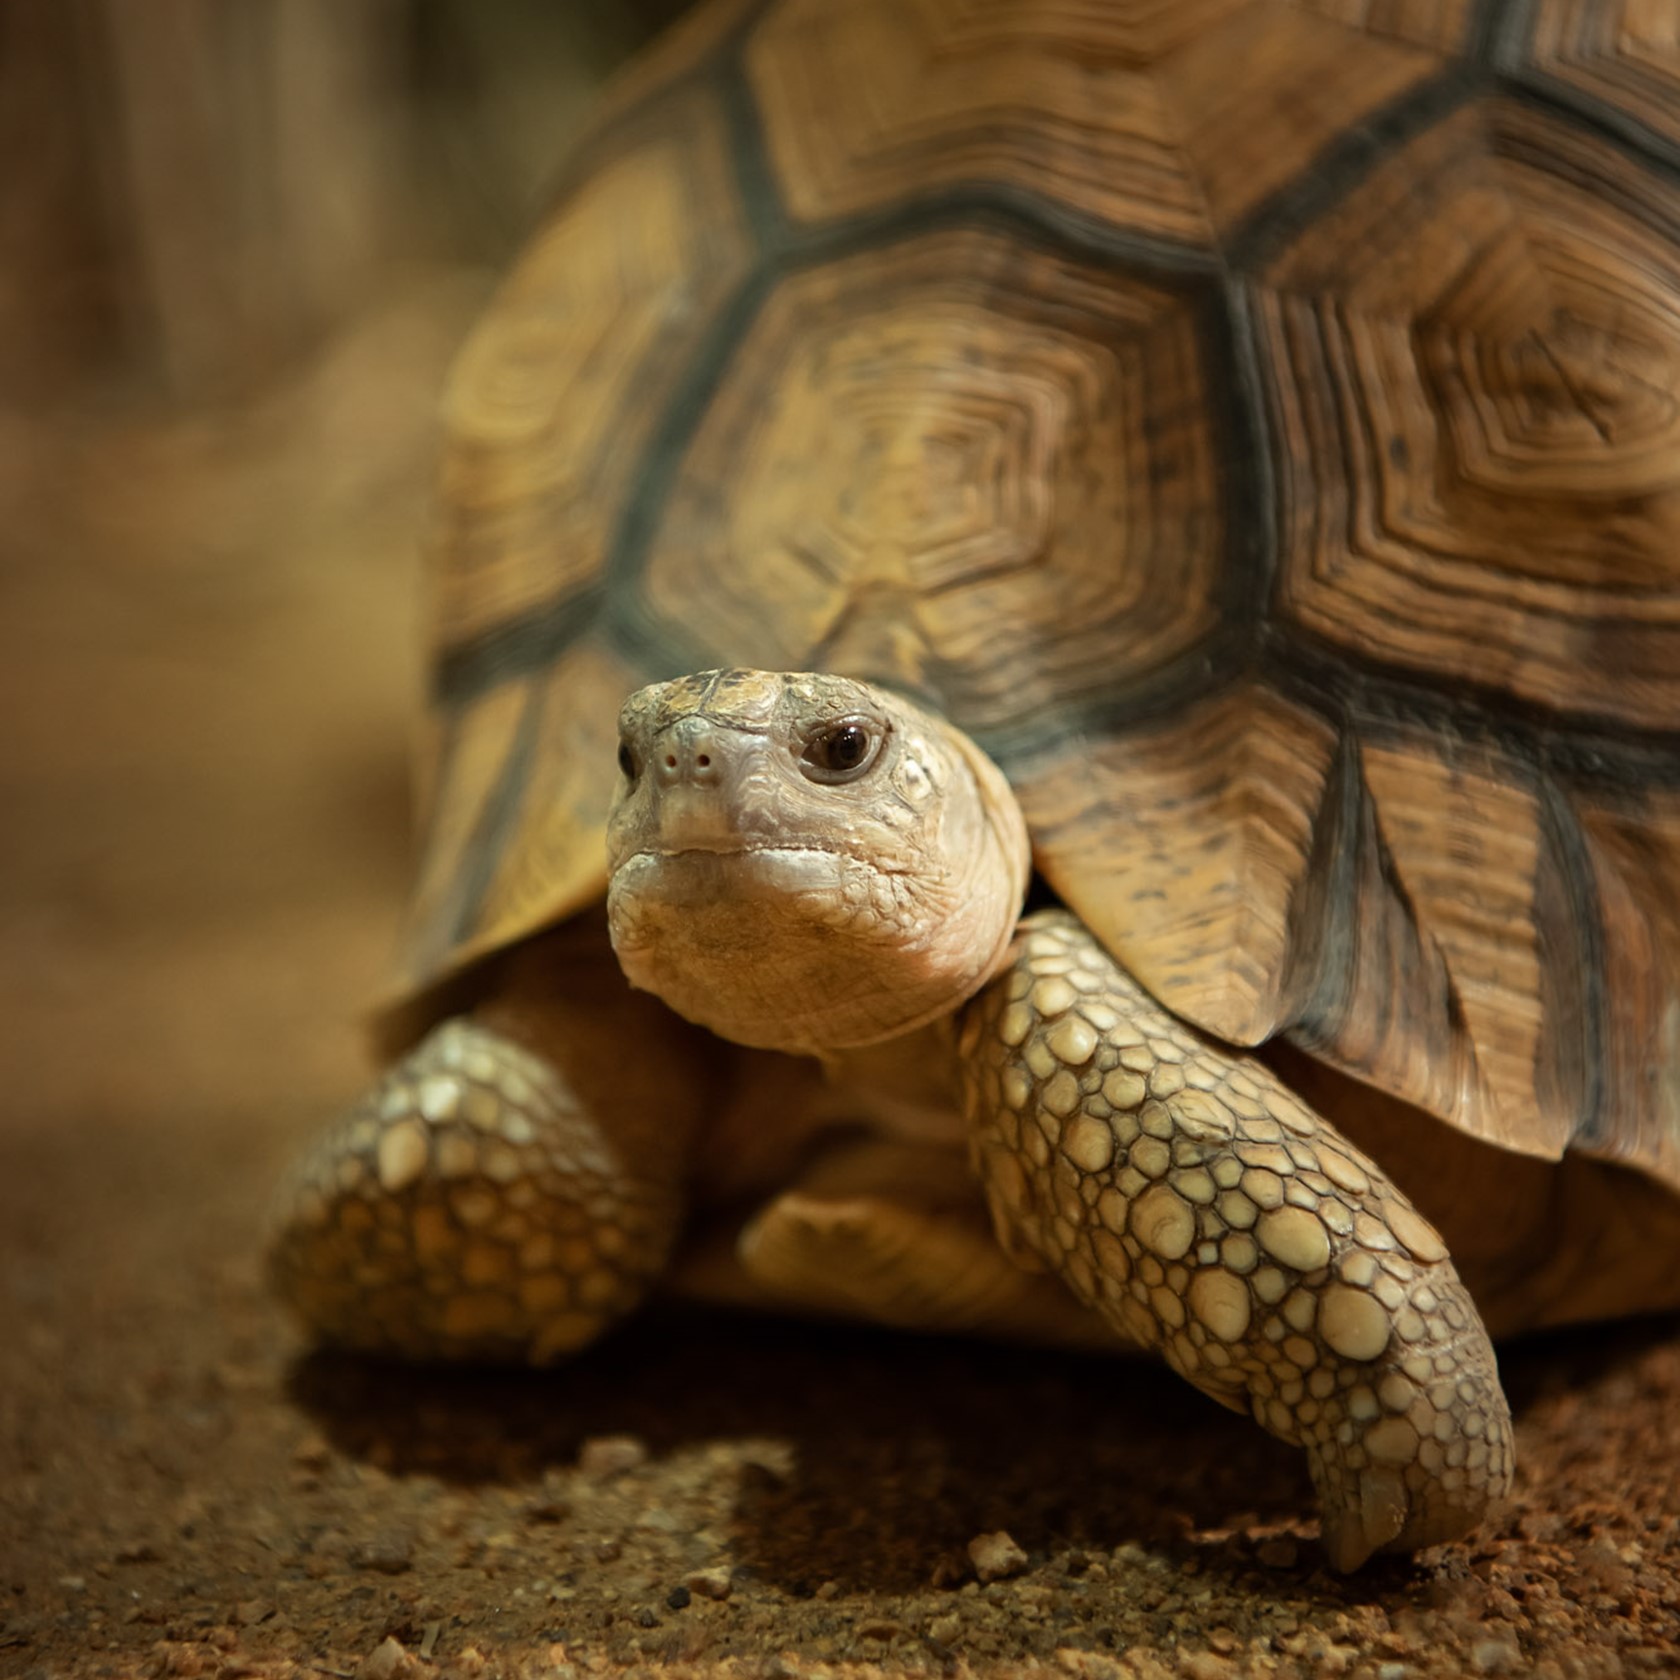 A Ploughshare Tortoise at Jersey Zoo